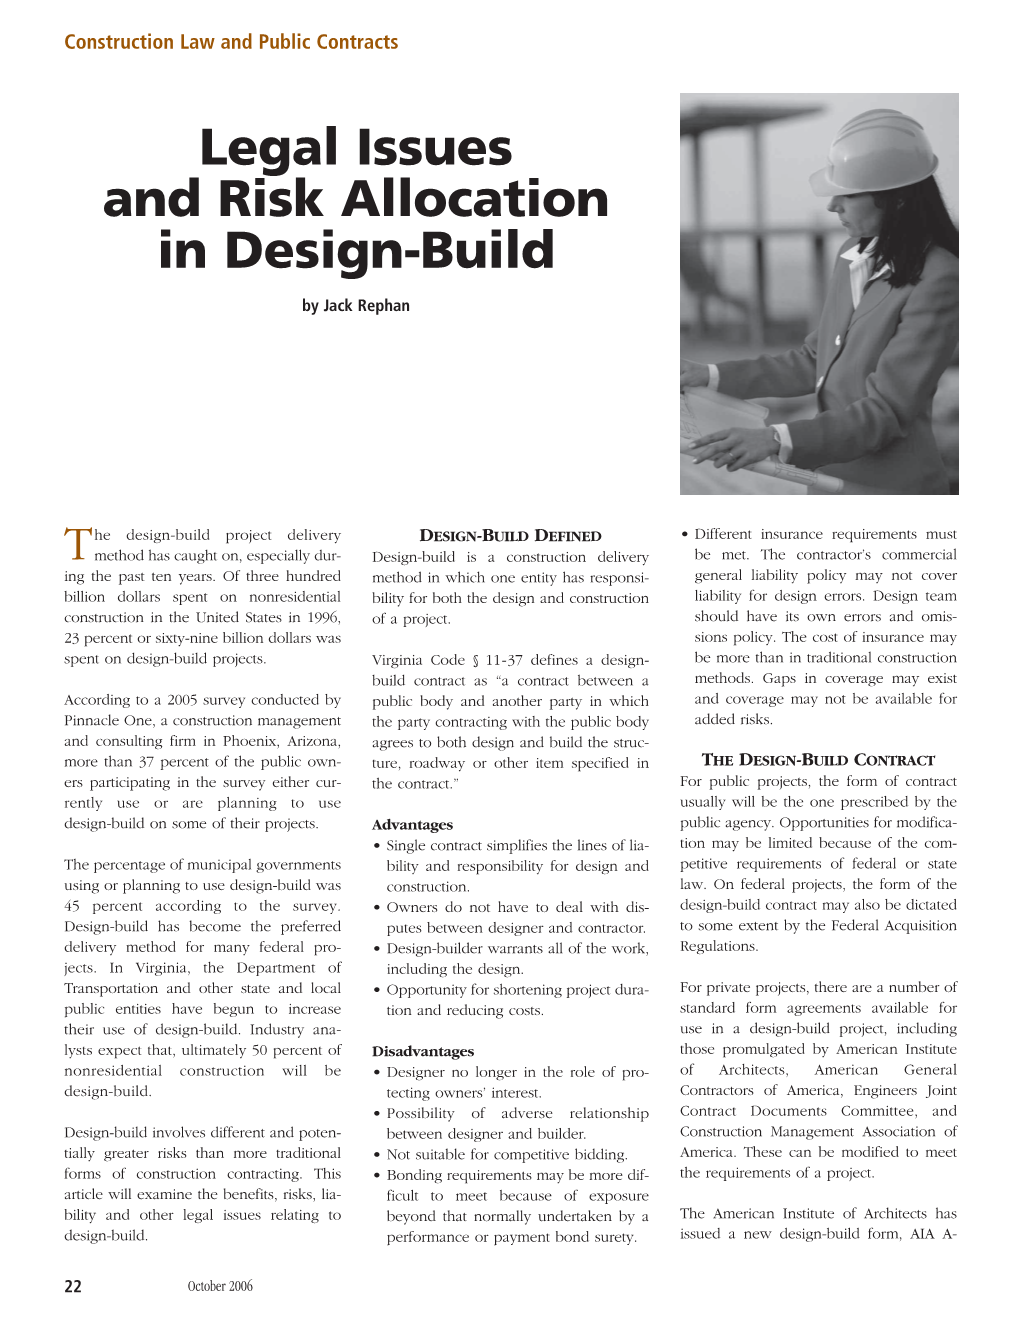 Legal Issues and Risk Allocation in Design-Build